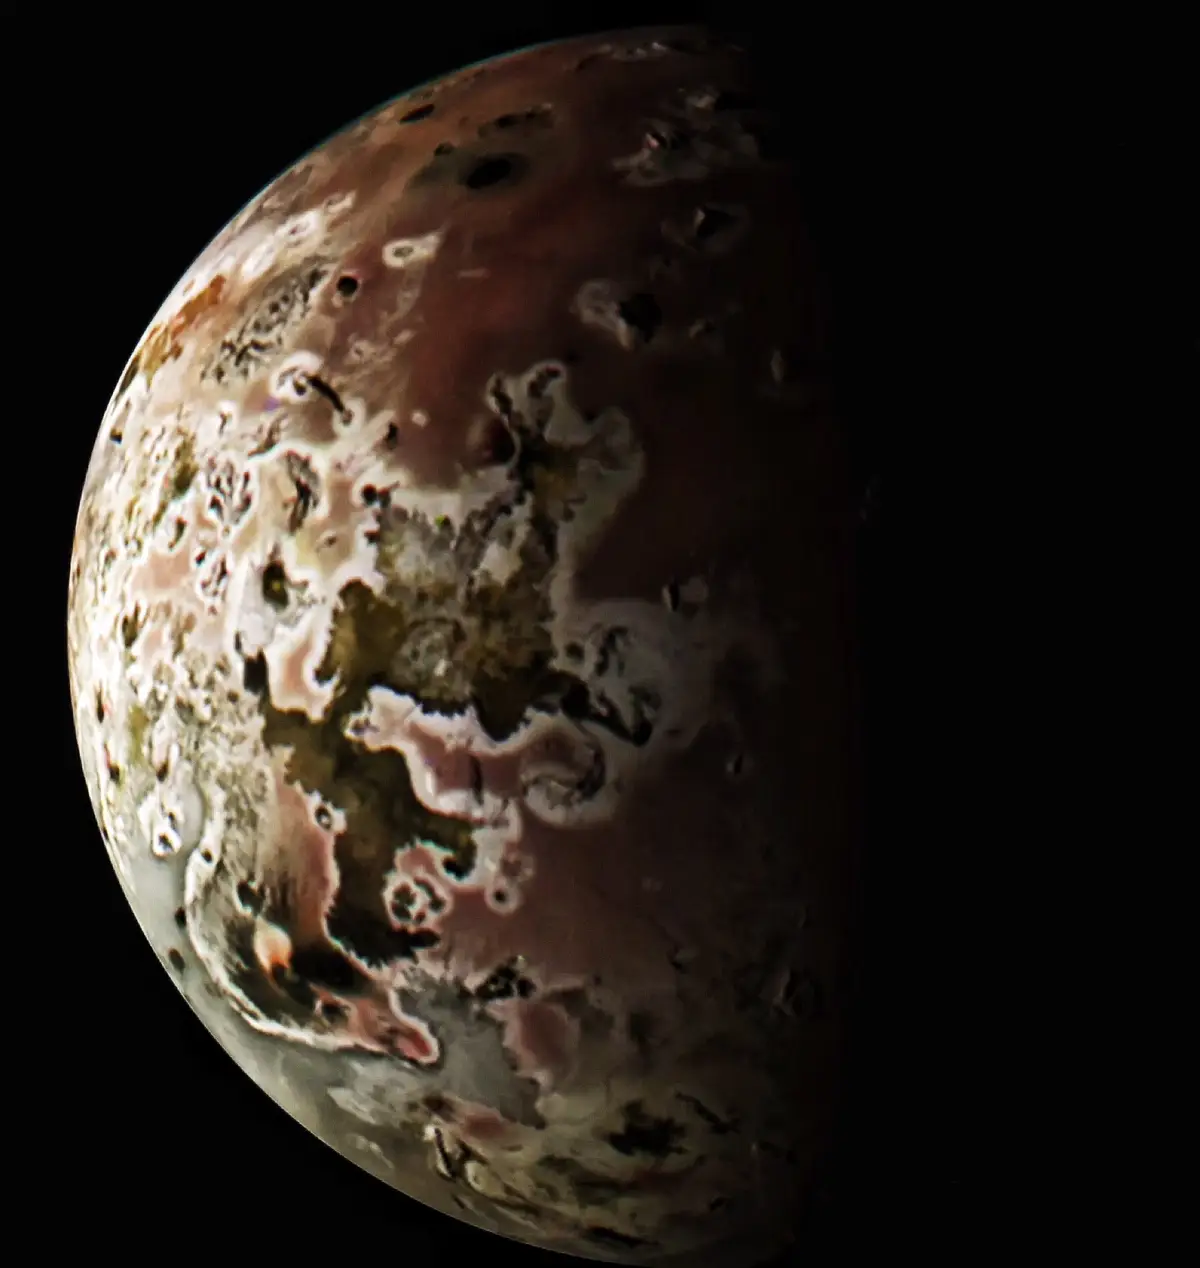 A new image of the volcanic moon Io taken by NASA's Juno probe.#fypシ゚viral🖤tiktok #music_space #galaxy #universe 